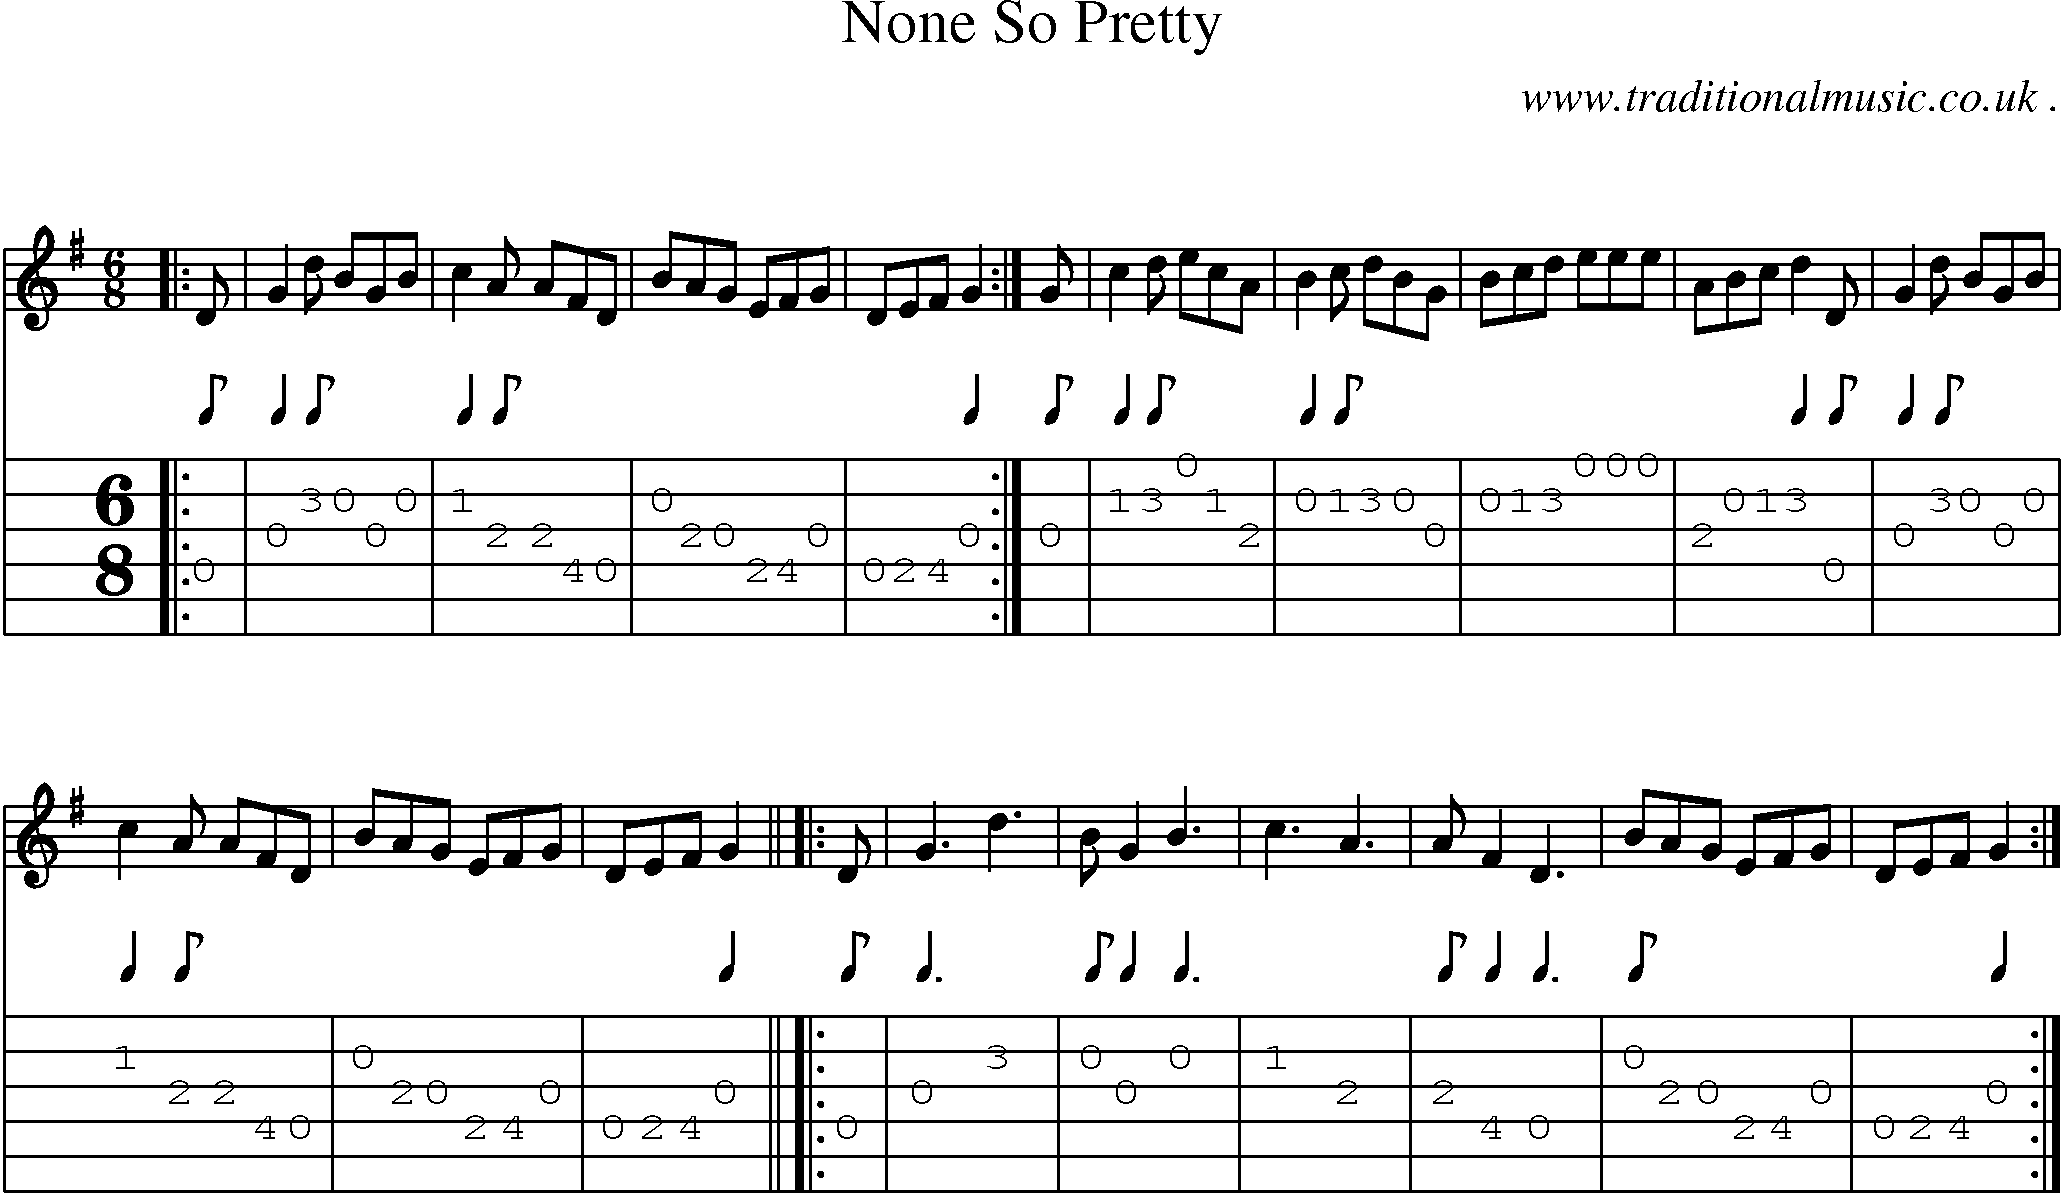 Sheet-Music and Guitar Tabs for None So Pretty